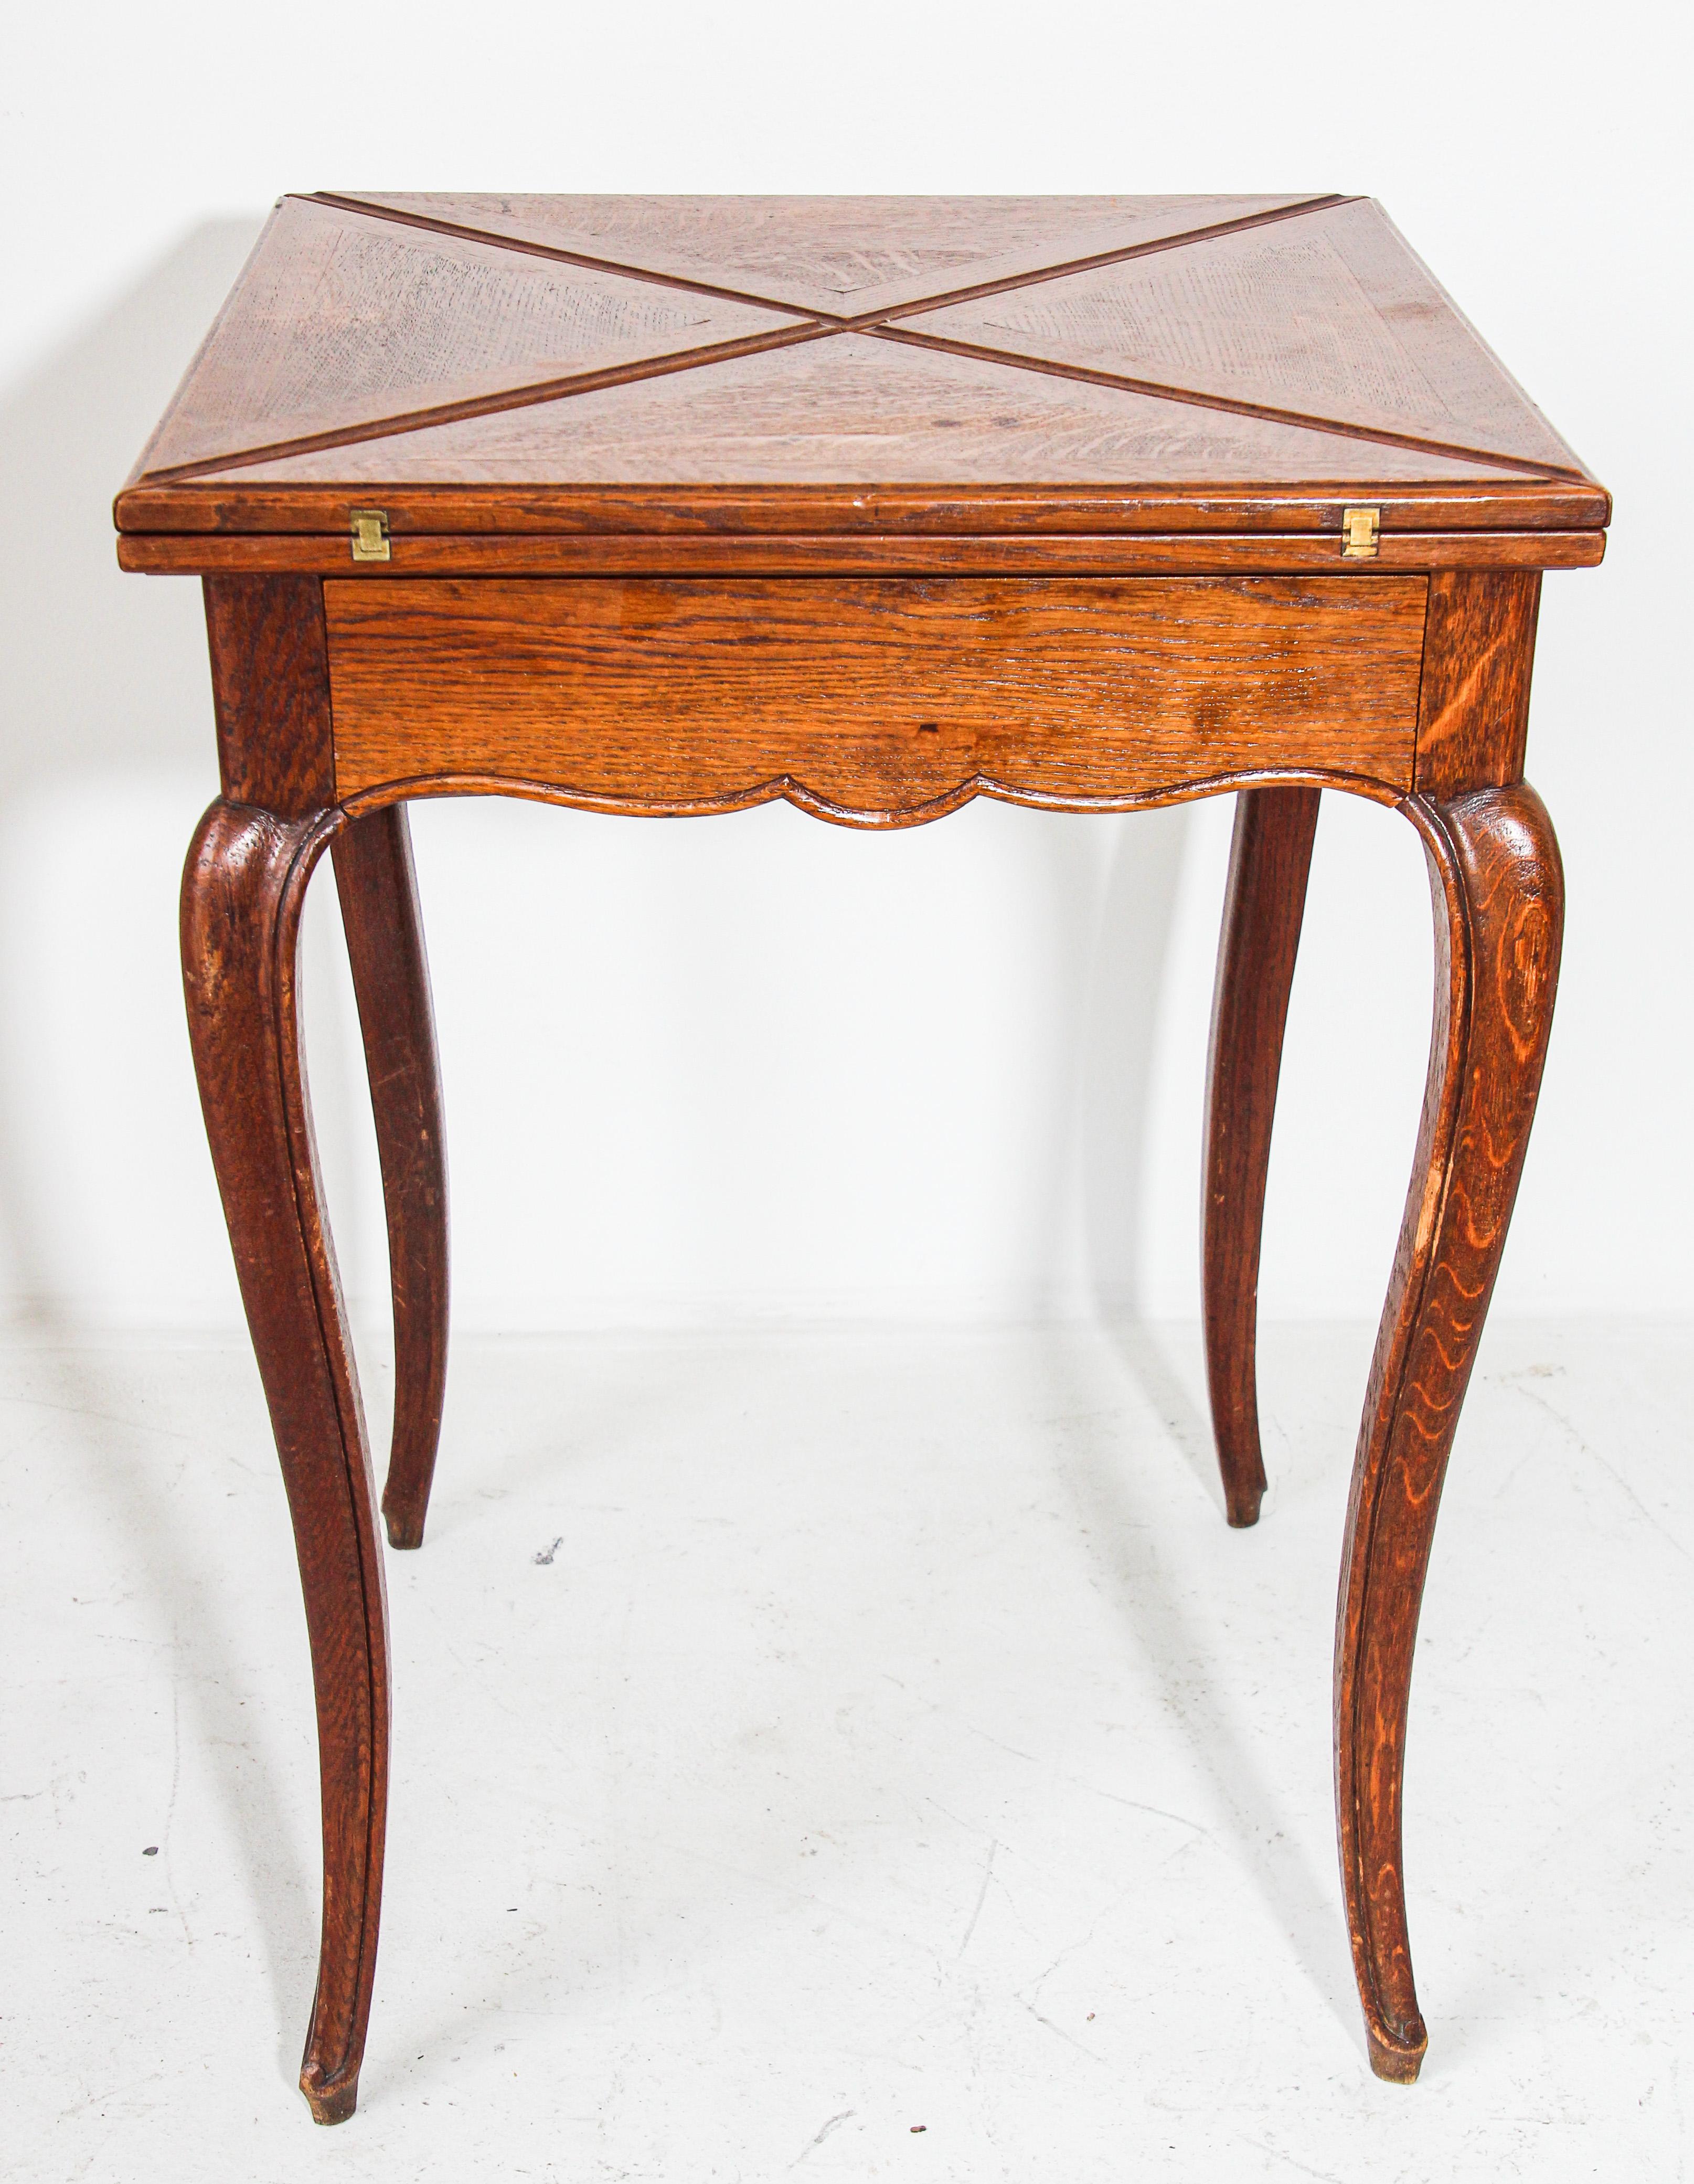 Beautiful antique Georgian mahogany napkin folding card game table.
Used it as a console or writing table when folded. 
The board in playing position is covered with a brown felt. 
A discrete side drawer in front, the whole supported on cabriole